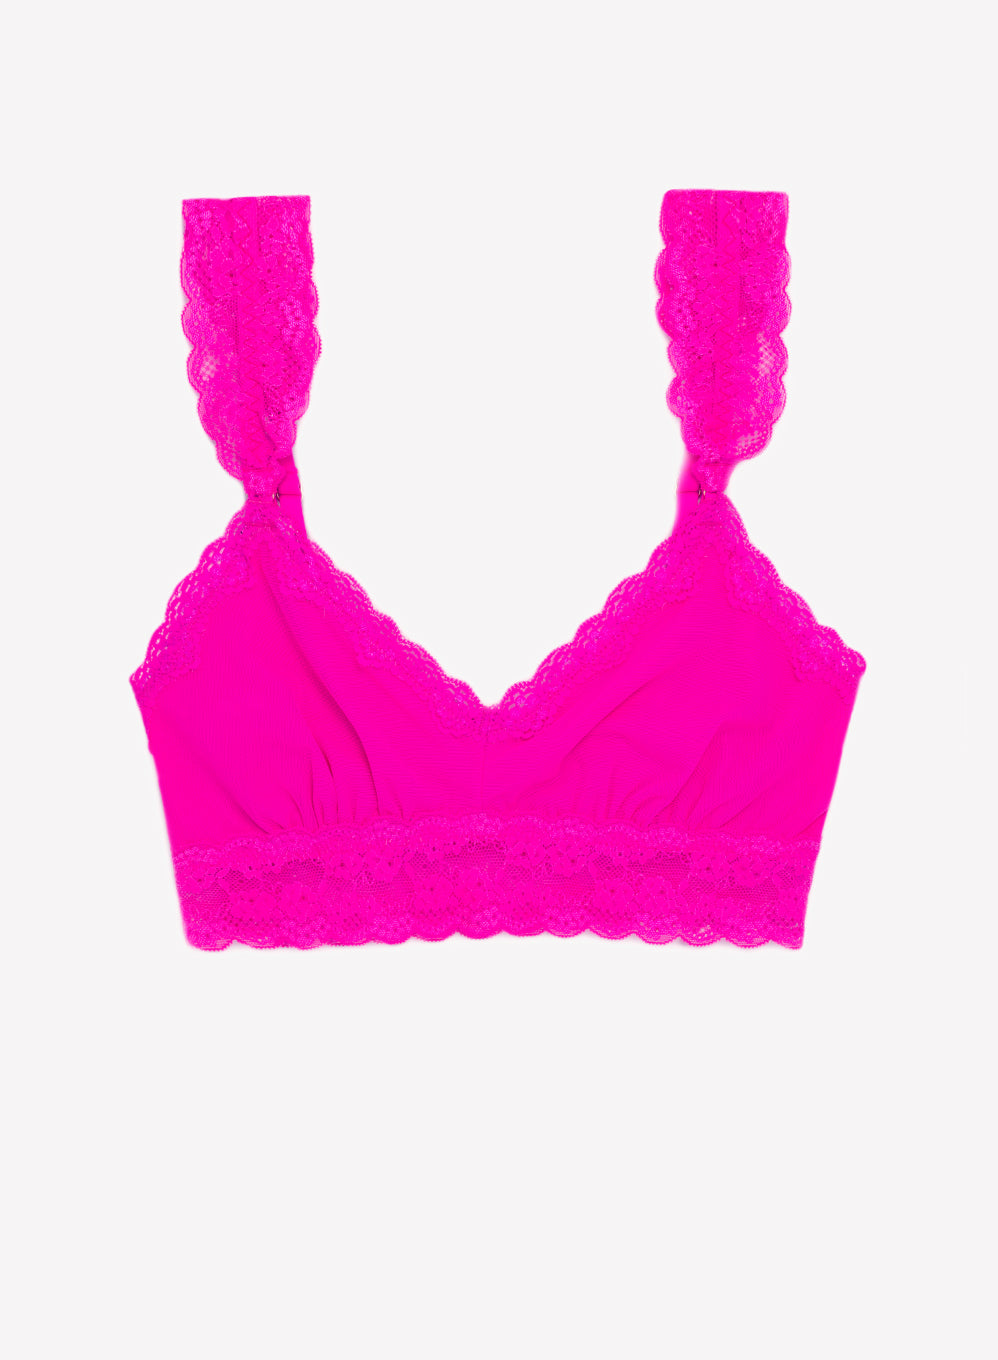 Stylish and Comfortable Mesh Fishnet Bralette from PINK Victoria's Secret